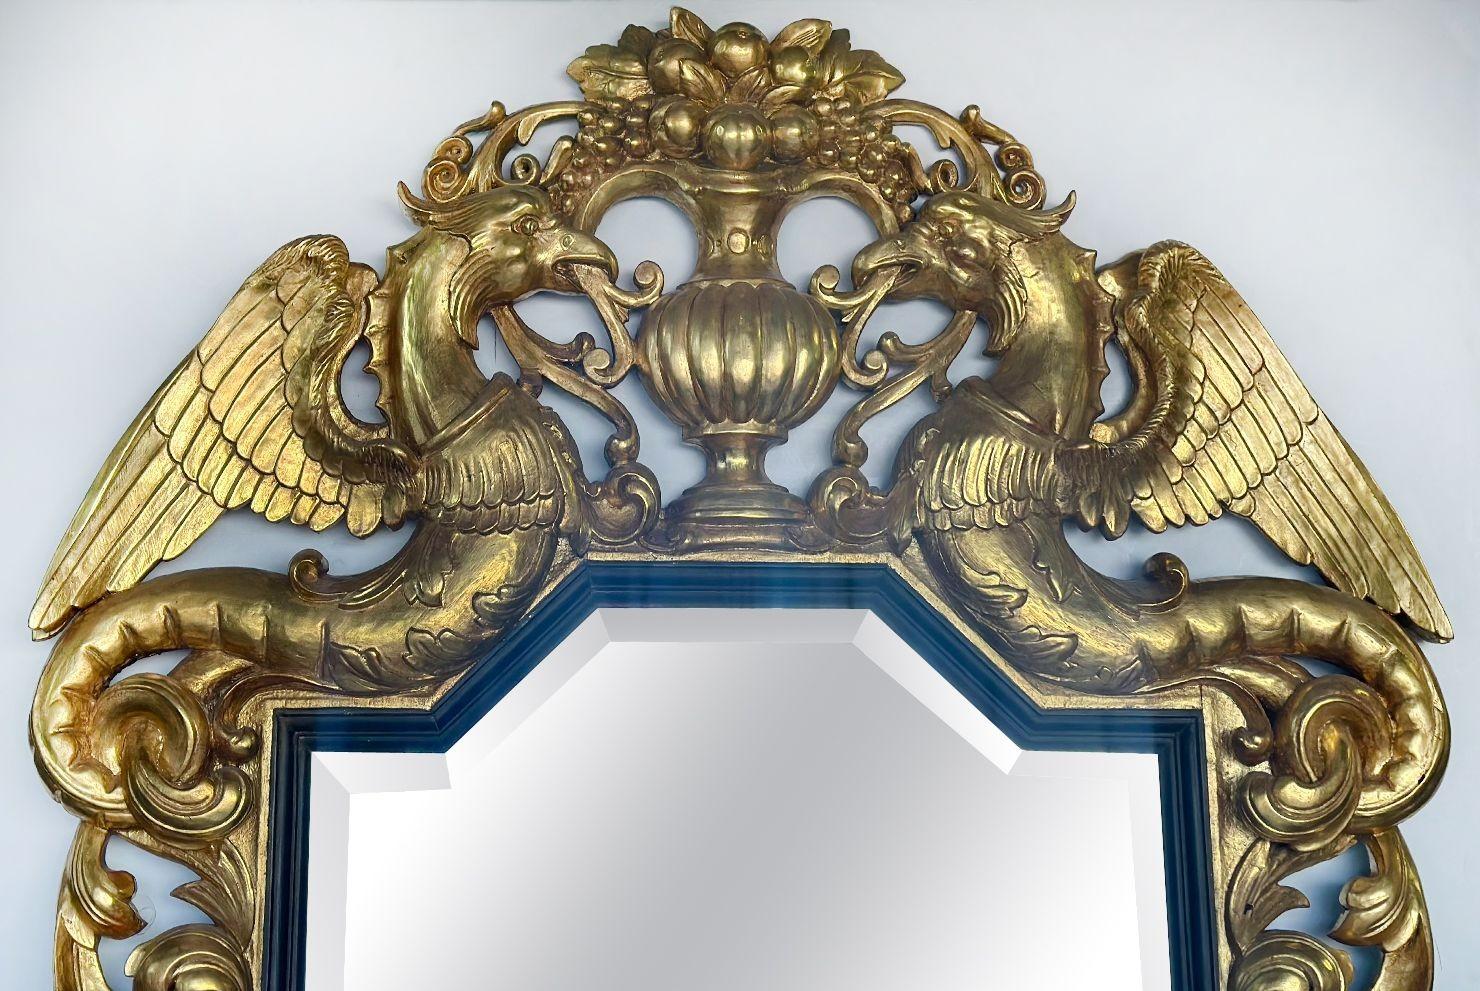 Palatial hand-carved giltwood mirror featuring a 1.5 inch beveled glass. This exquisite piece boasts intricate carved details, including two majestic phoenix mythical creatures adorning the top, alongside an urn figure brimming with an abundance of